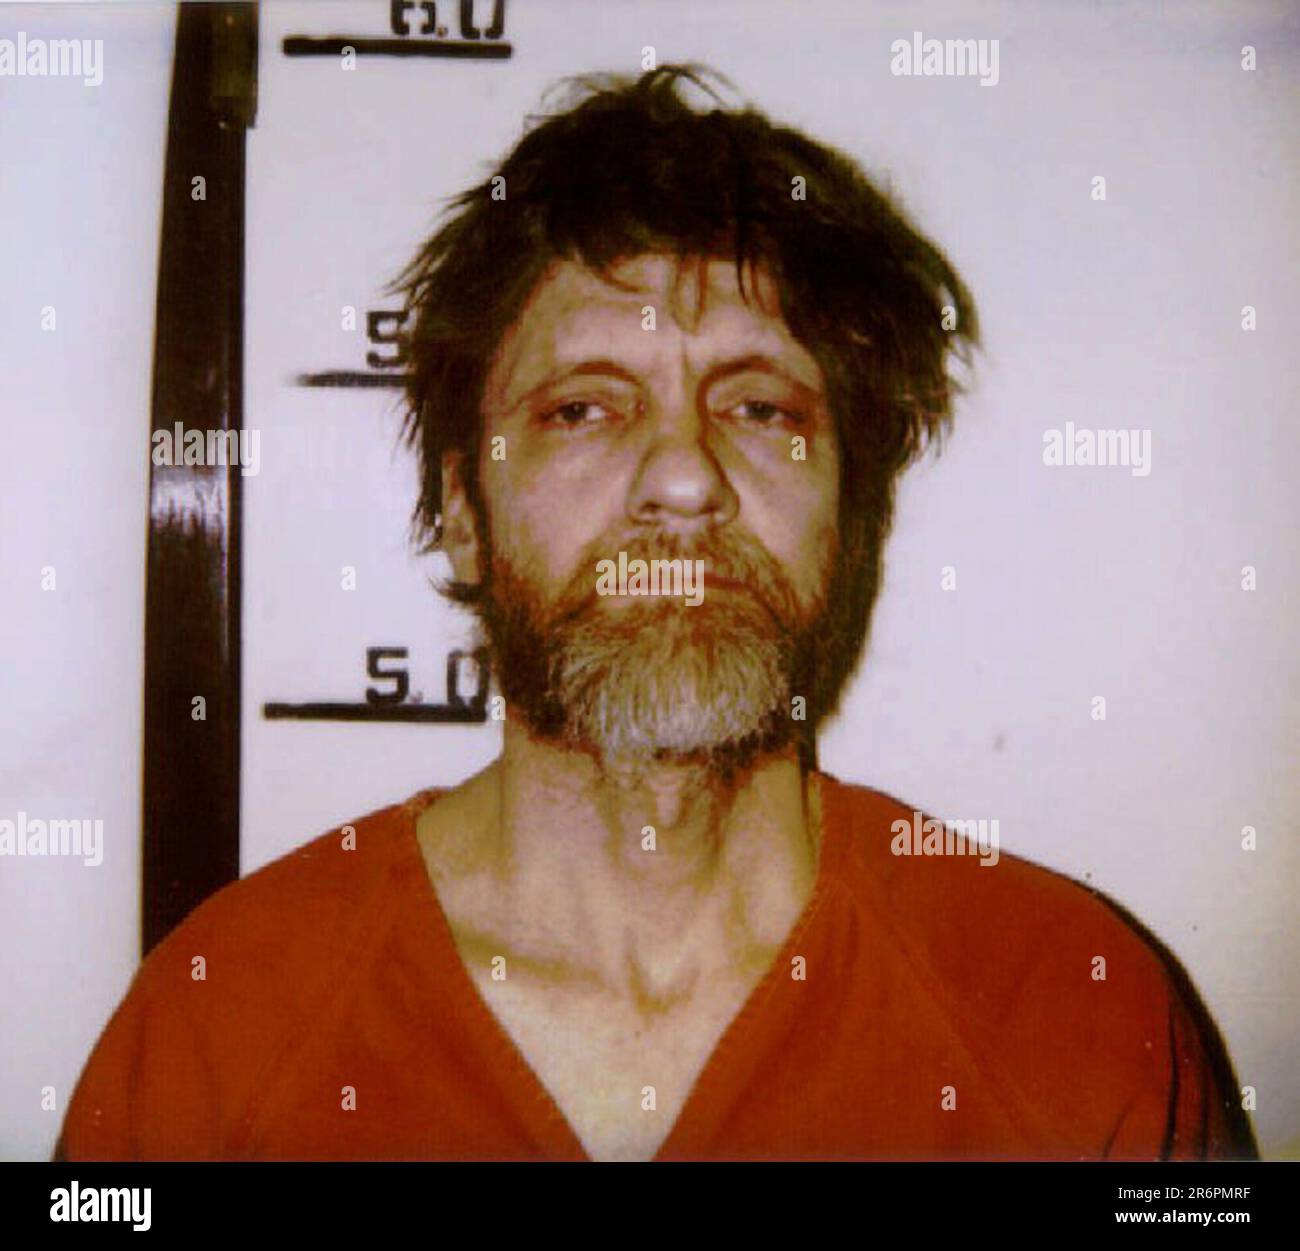 April 9, 1996, Helena, Montana, USA: 'Unabomber' TED J. KACZYNSKI, 53, is shown in an April 3,1996 mug shot at Lewis and Clark County Jail, Helena. KACZYNSKI who manufactured bombs and would send them via mail, sent bombs to technology based firms, tech-schools, science labs and airlines in the effort to destroy the wave of technology booming in the 1980's and 90's. His bombs killed three people and wounded 23. He was arrested in 1996 after his brother David reported him to FBI. To avoid the death penalty, Kaczynski entered into a plea agreement, under which he pleaded guilty and was sentenced Stock Photo